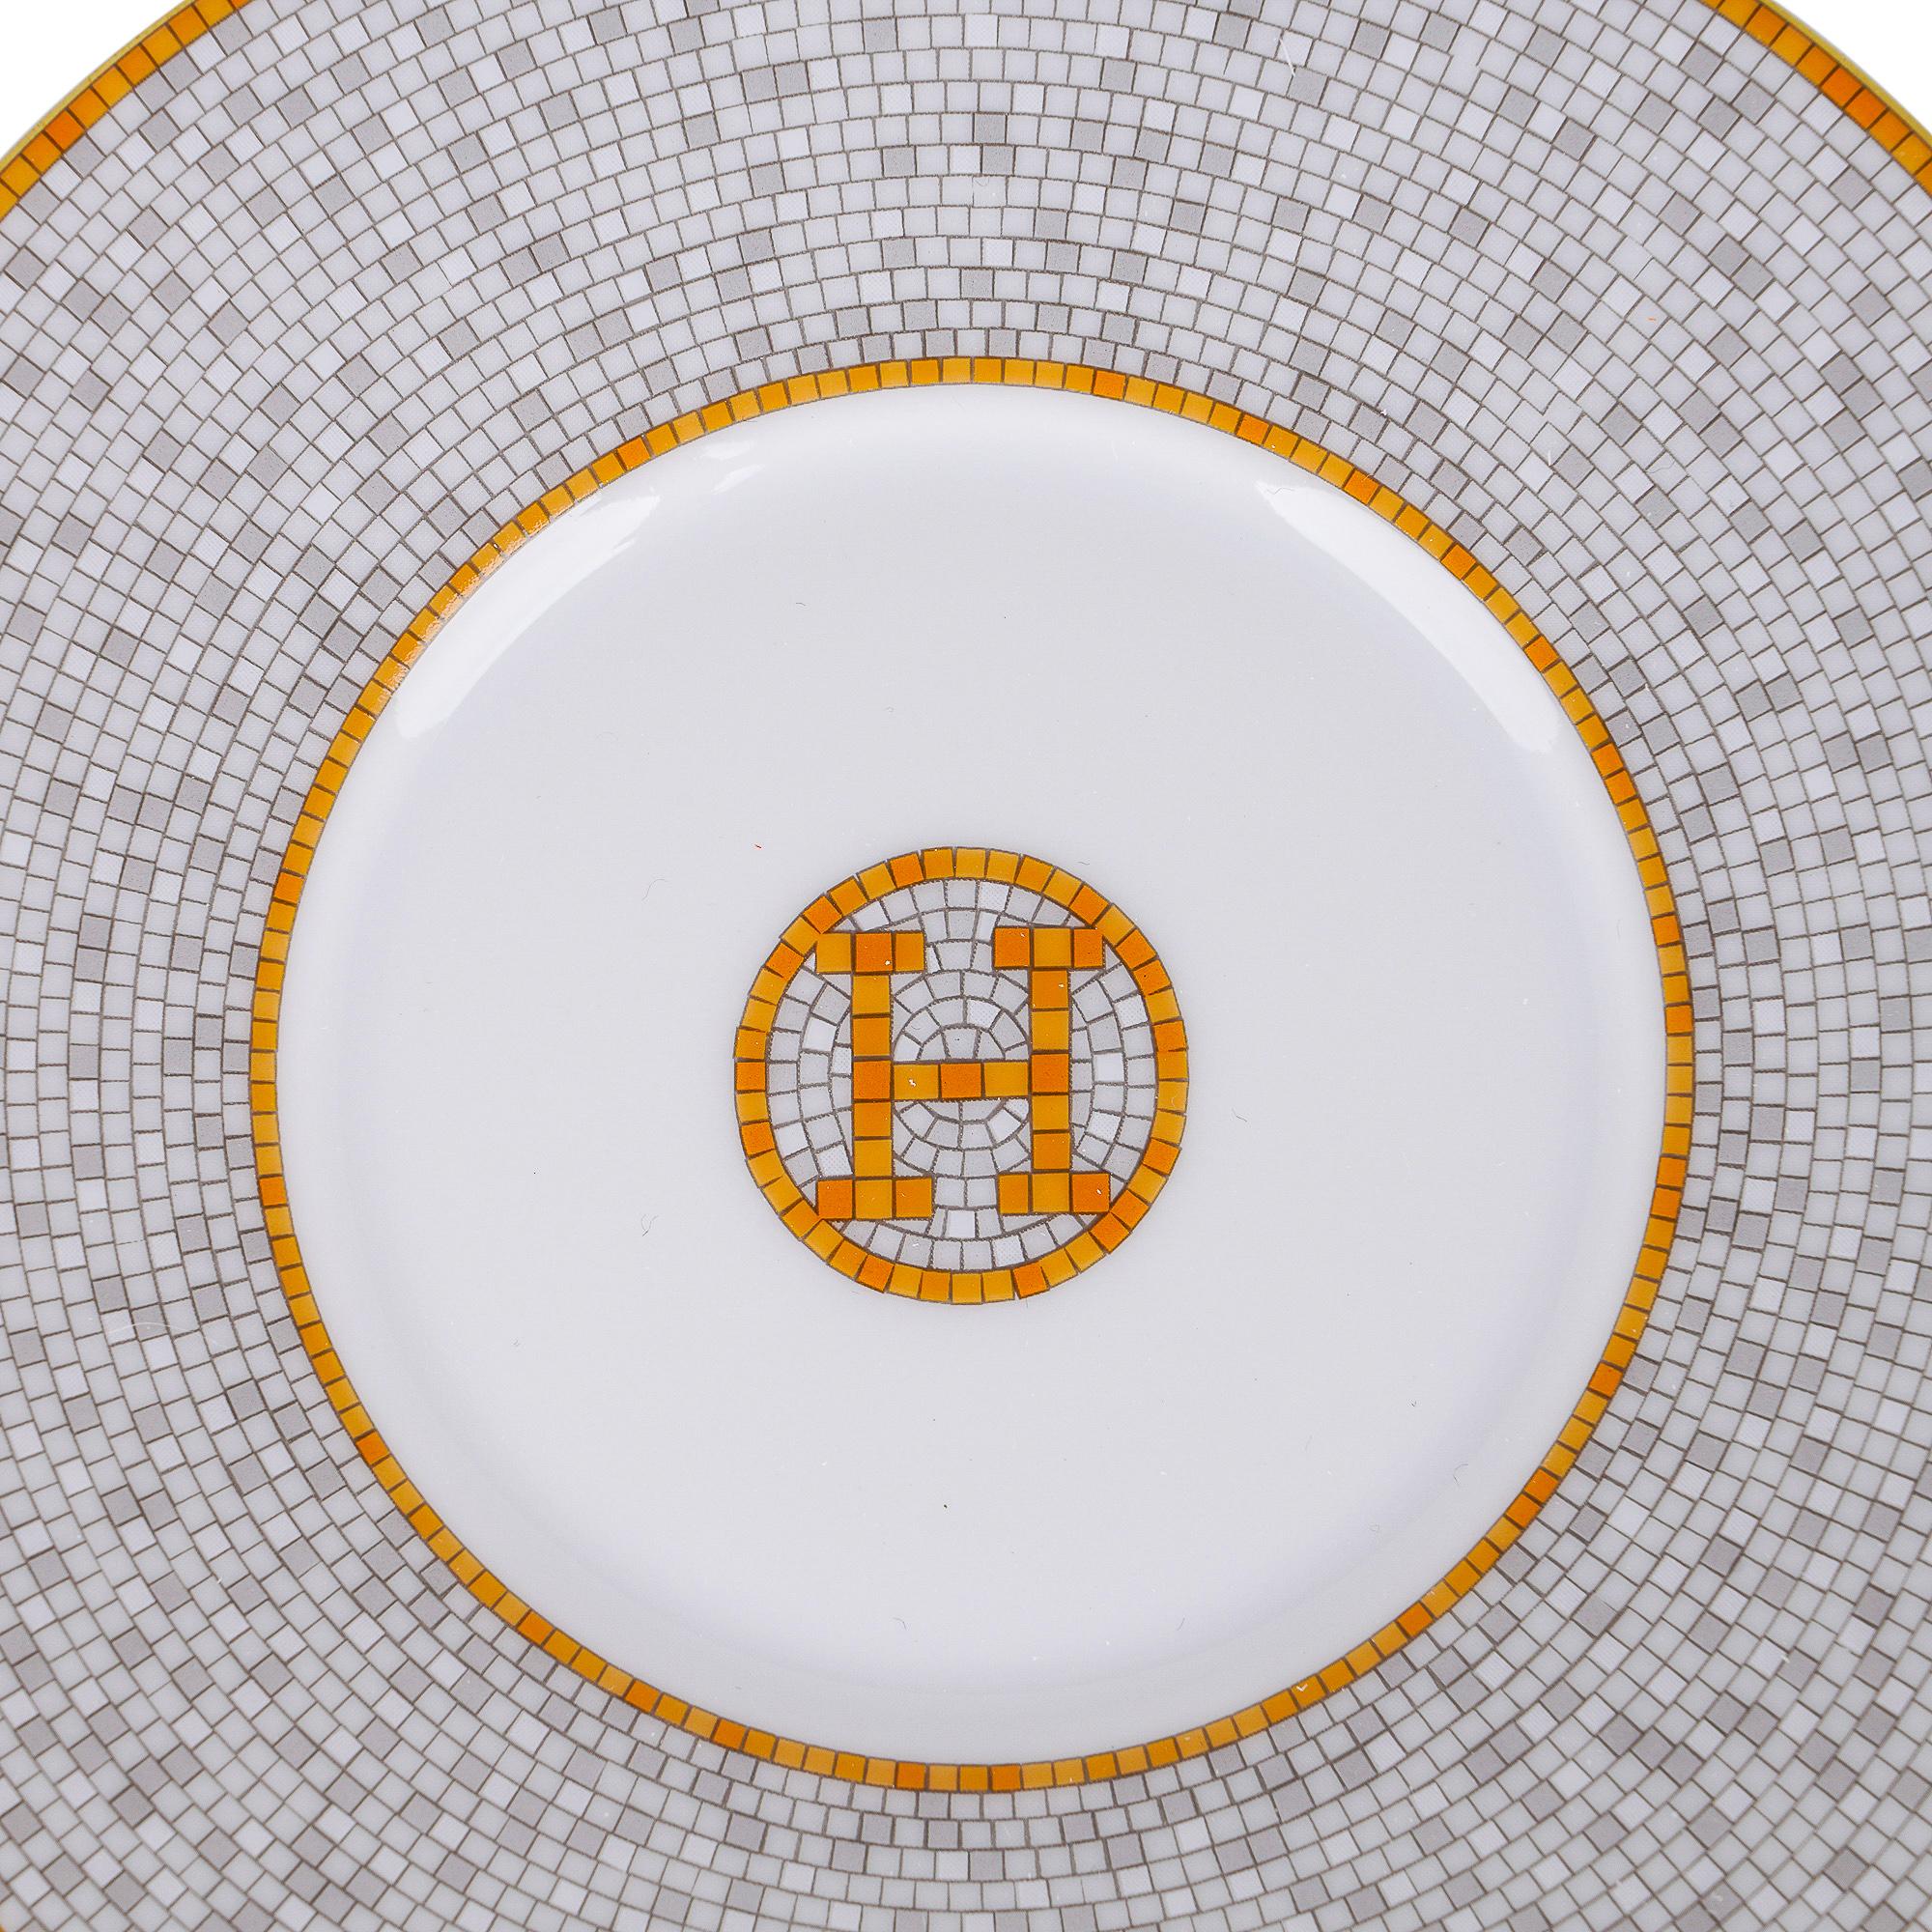 Mightychic offers an Hermes Mosaique Au 24 Gold set of two teacups and saucers.
This beautiful porcelain Hermes Mosaique tea set creates a perfect setting for any table.
Inspired by the setting of the Paris Hermes flagship store 24 Faubourg